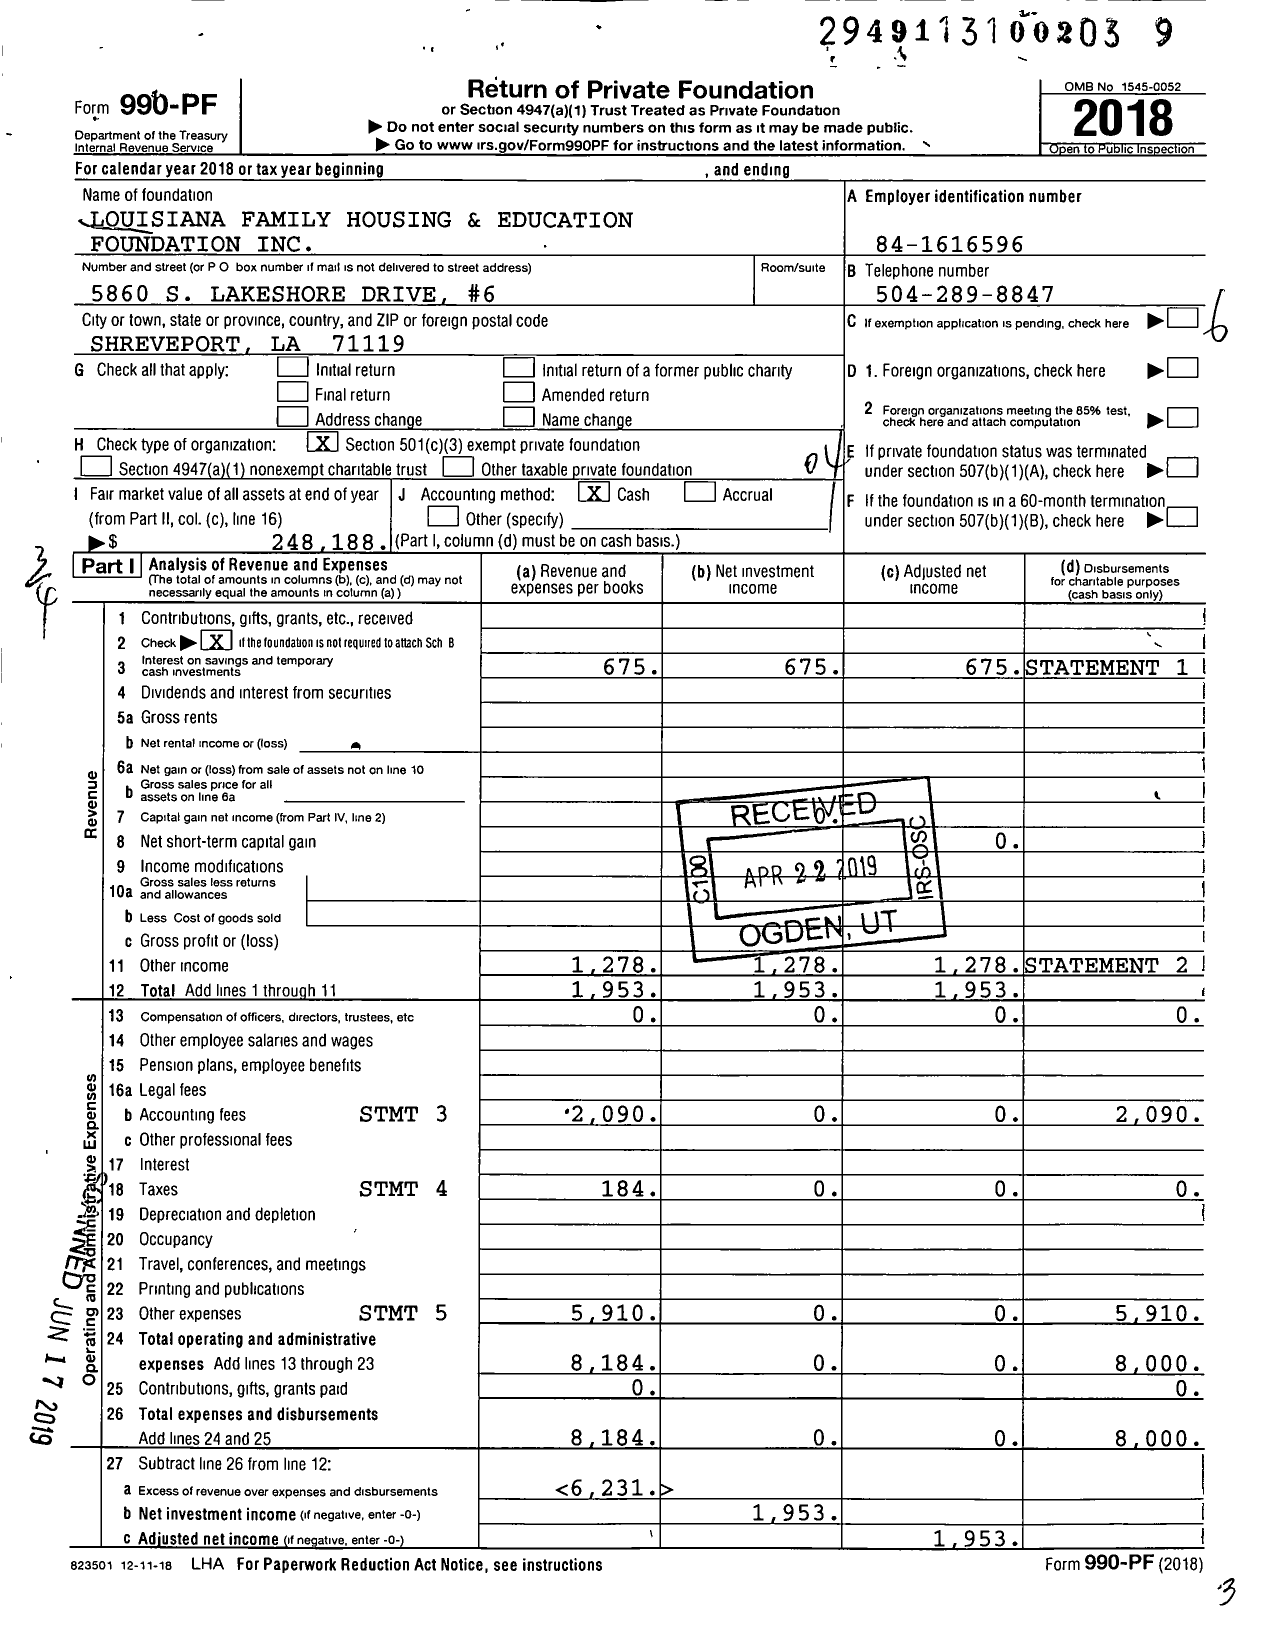 Image of first page of 2018 Form 990PF for Louisiana Family Housing and Education Foundation